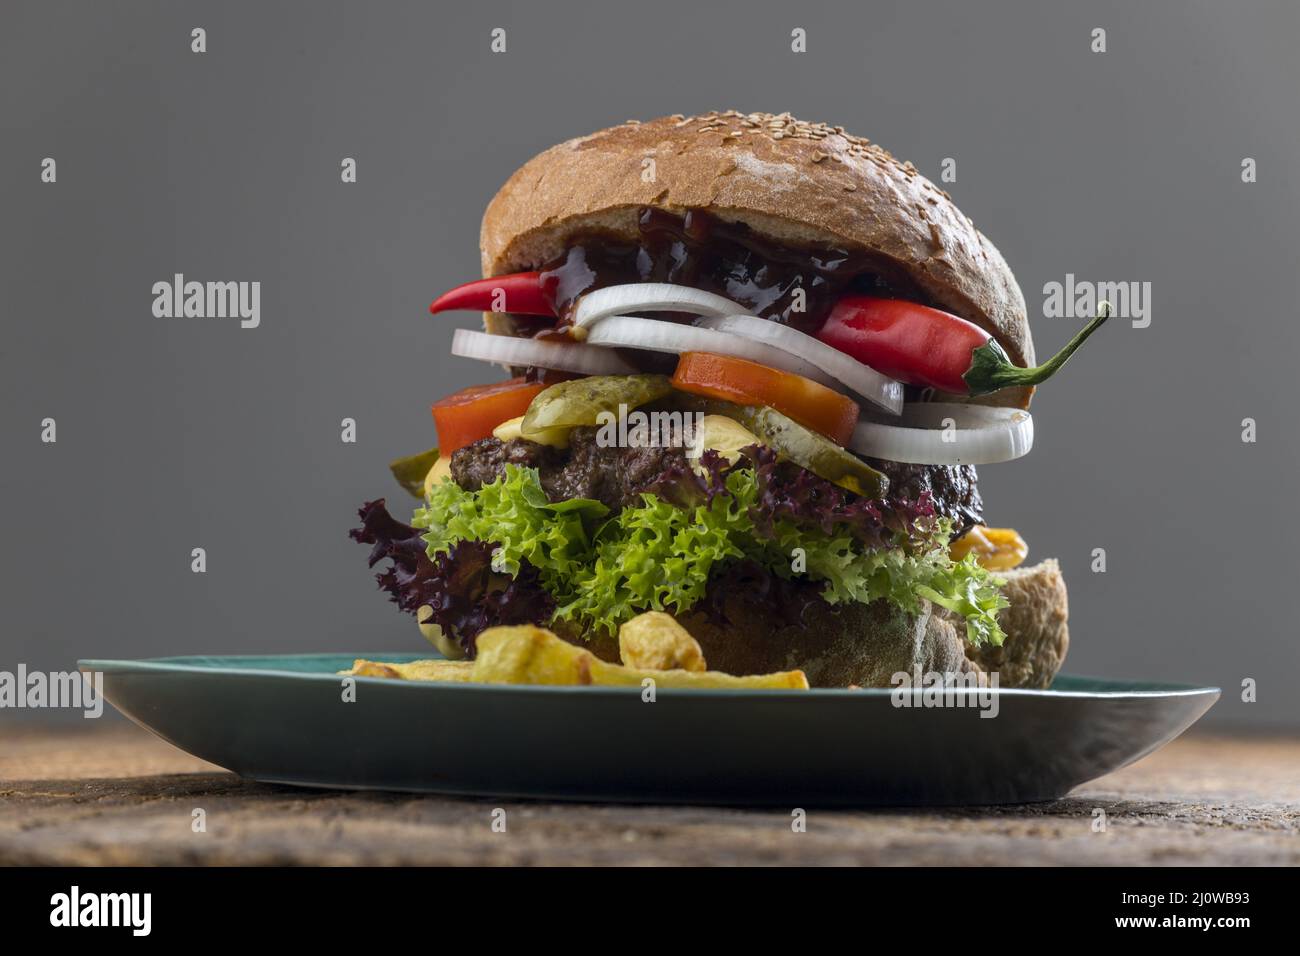 Cheeseburger on blue plate with chili Stock Photo